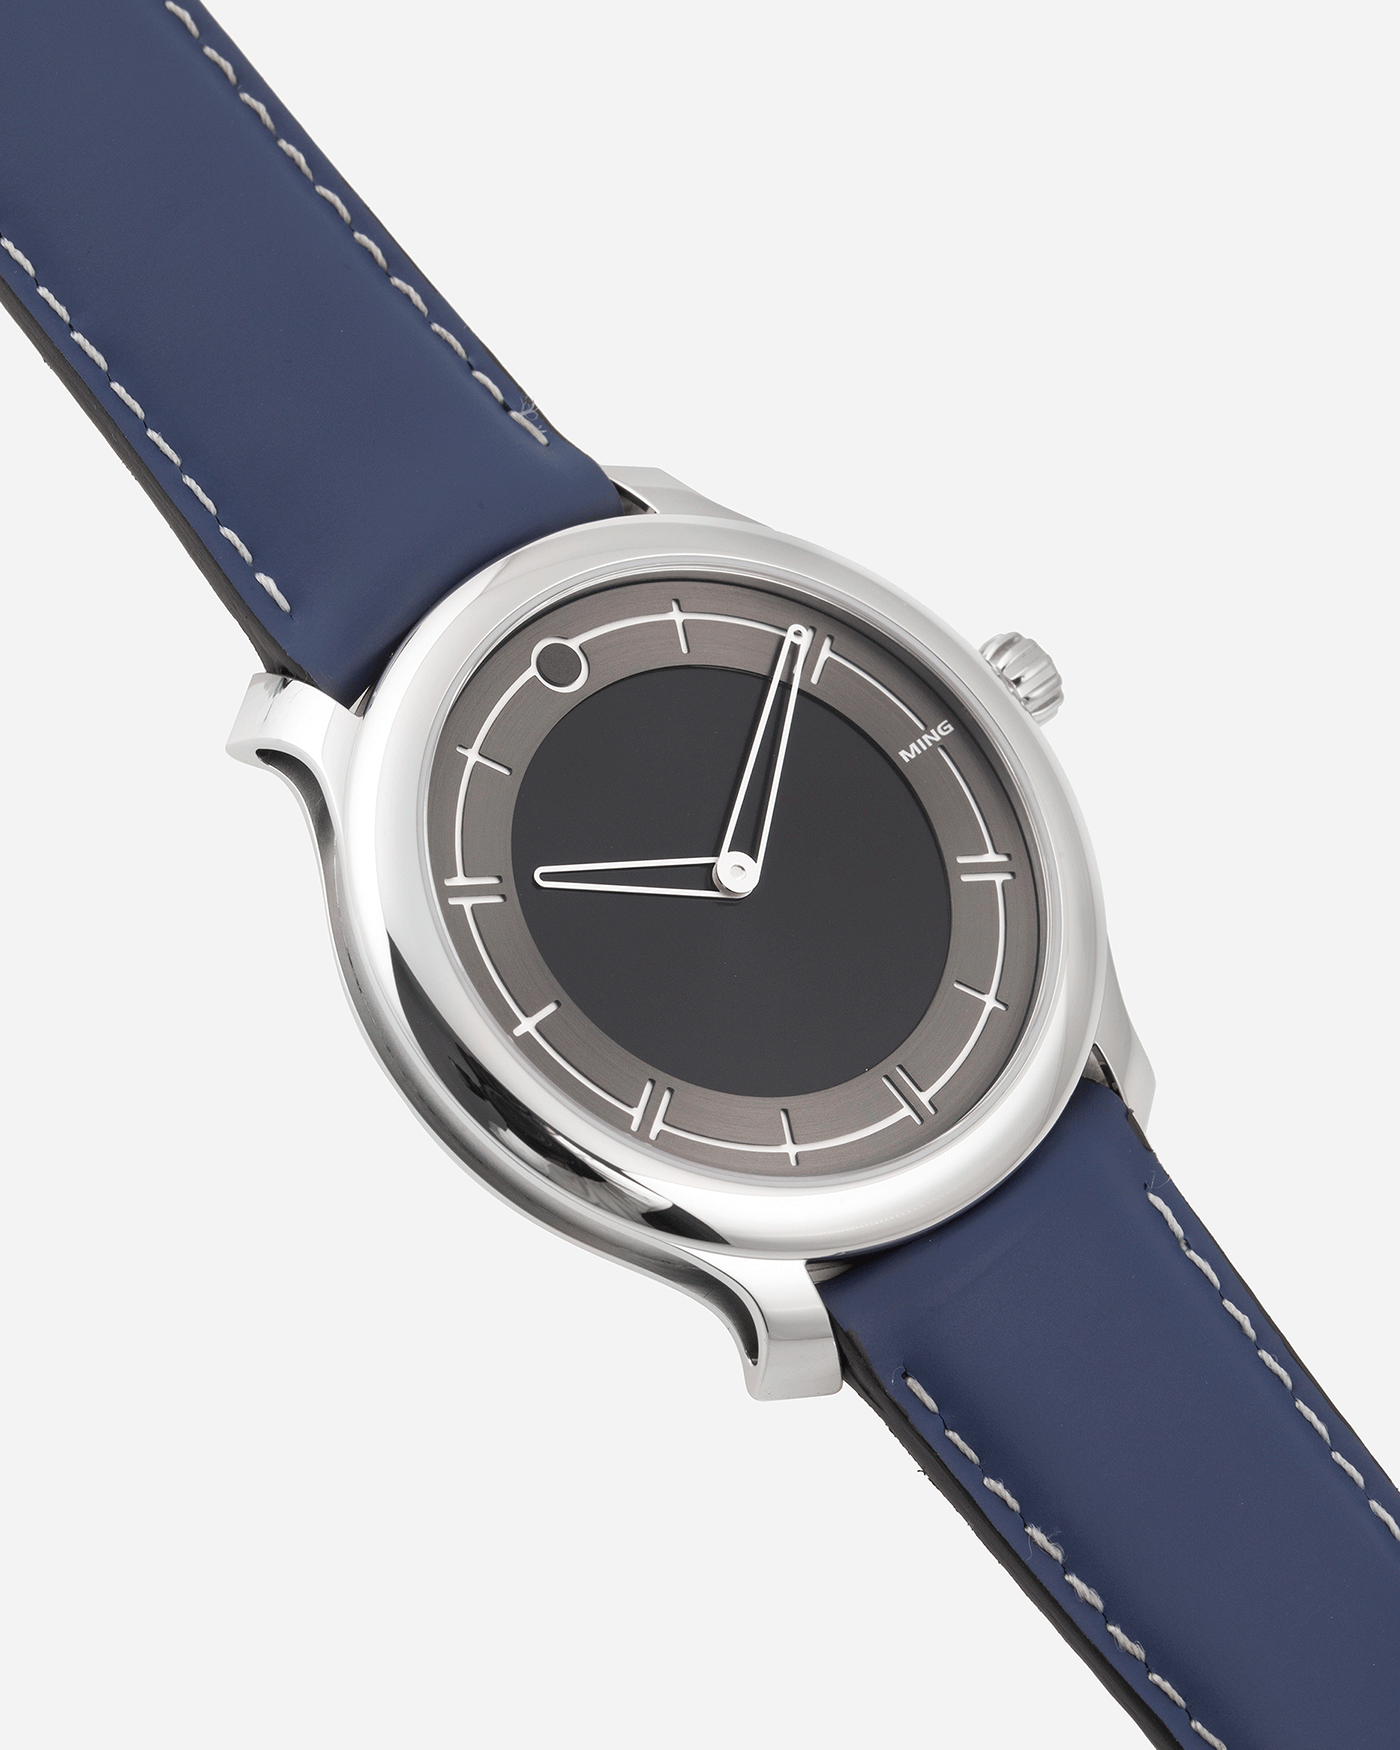 Brand: Ming Year: 2020 Model: 27.01 Material: Stainless Steel Movement: Heavily modified ETA Peseux 7001 Case Diameter: 38mm Strap: Jean Rousseau Blue Rubber for MING